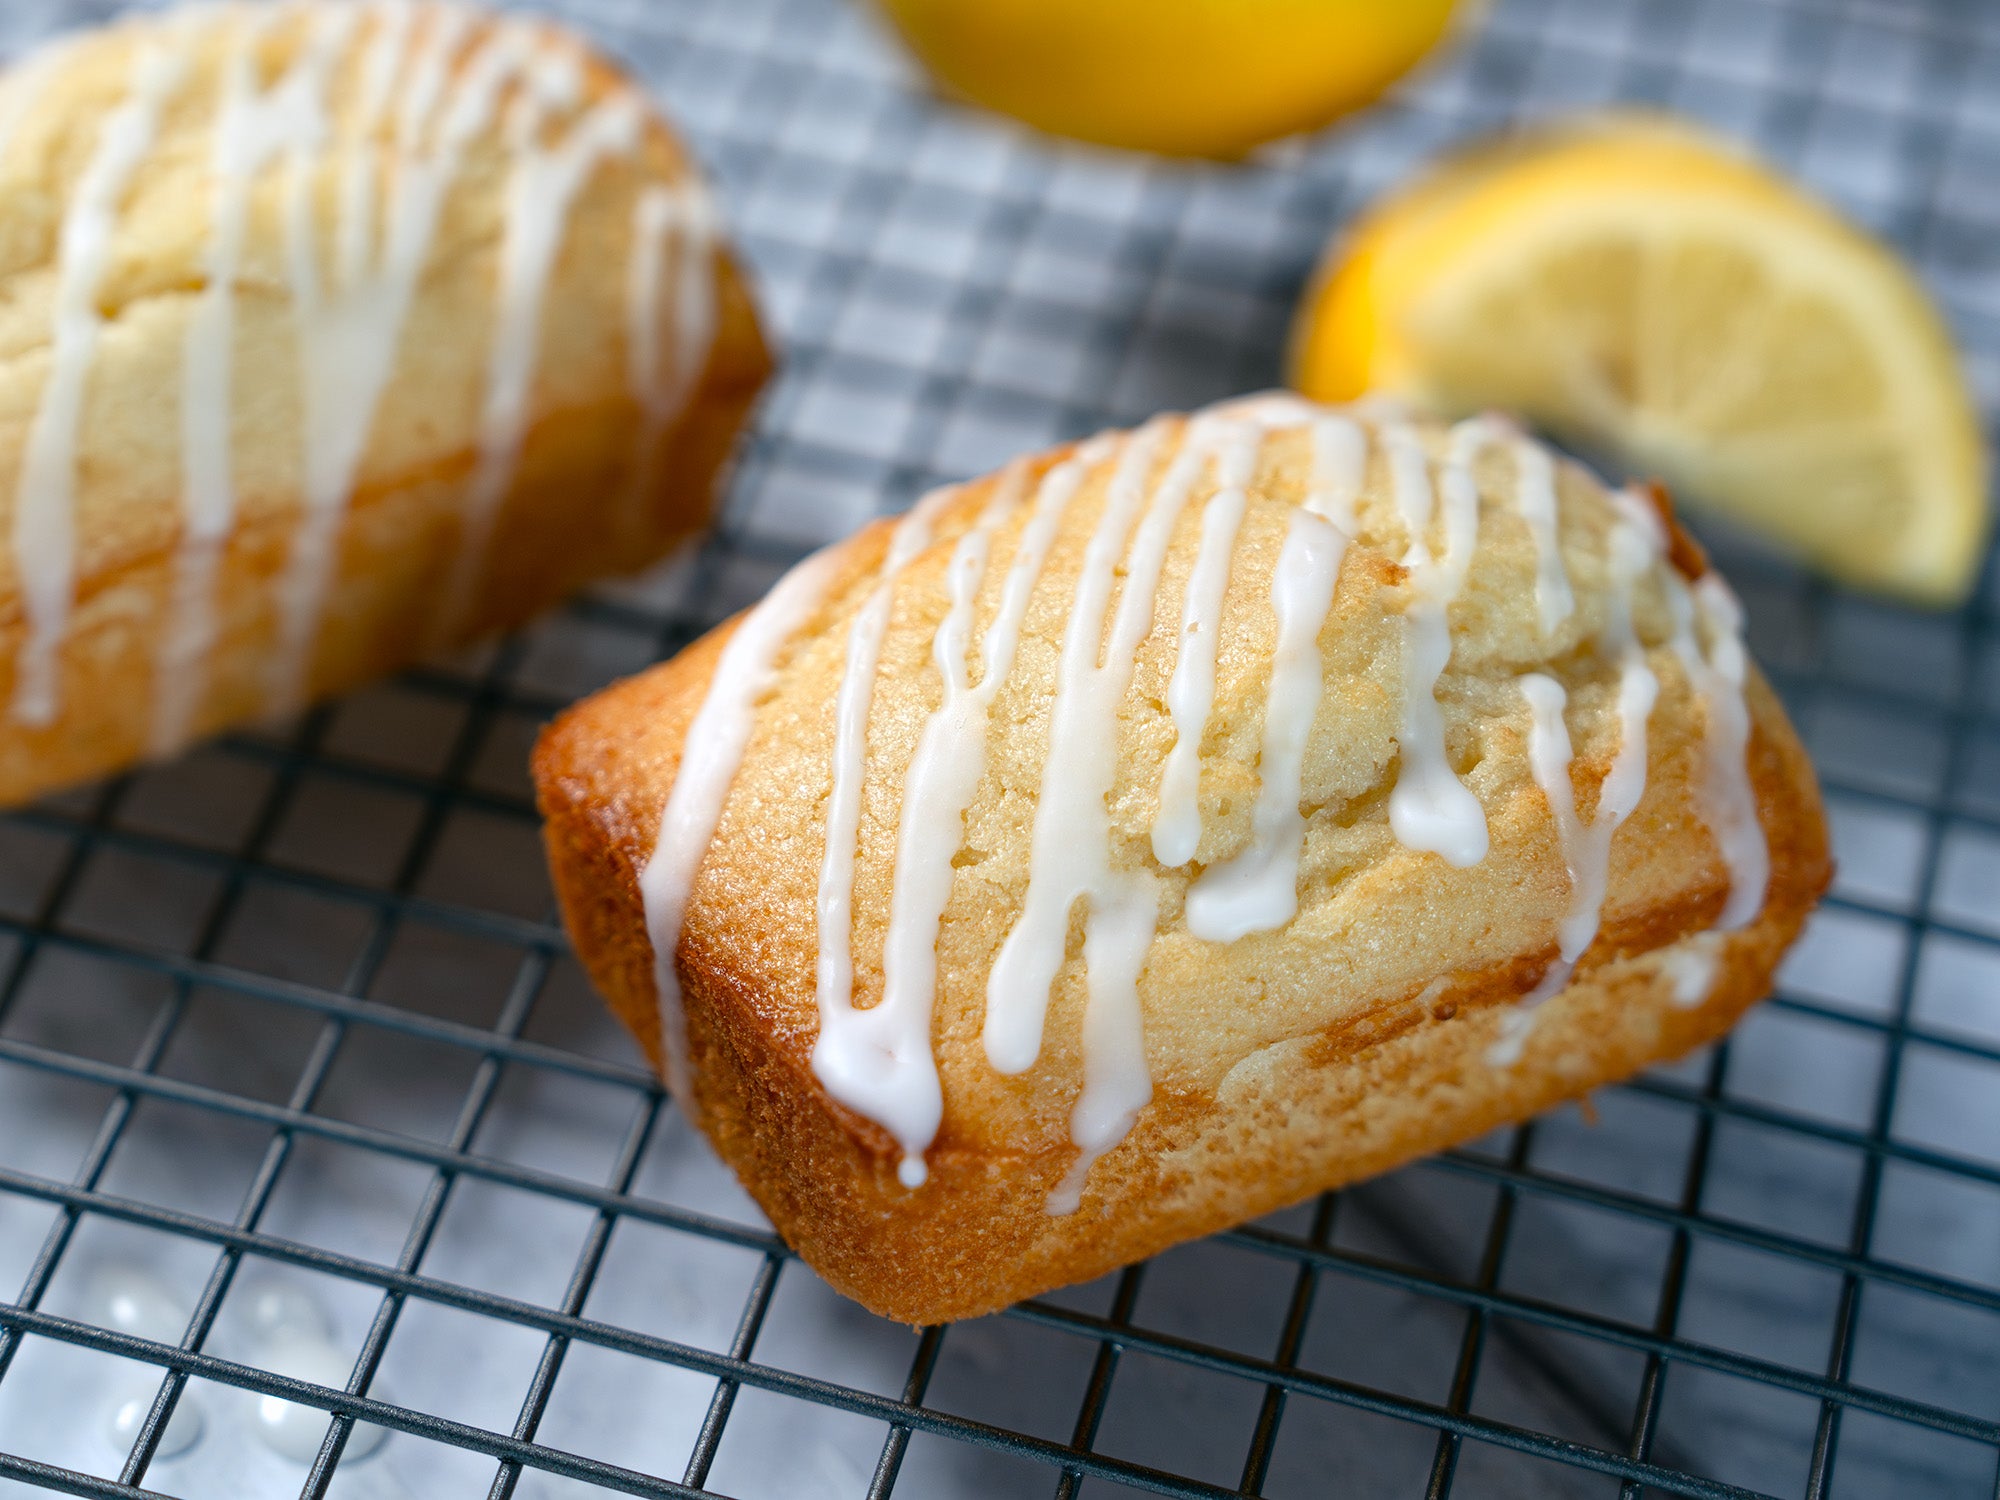 Two lemon mini loaves cool on a backing rack as a lemon rests behind them, out of focus.